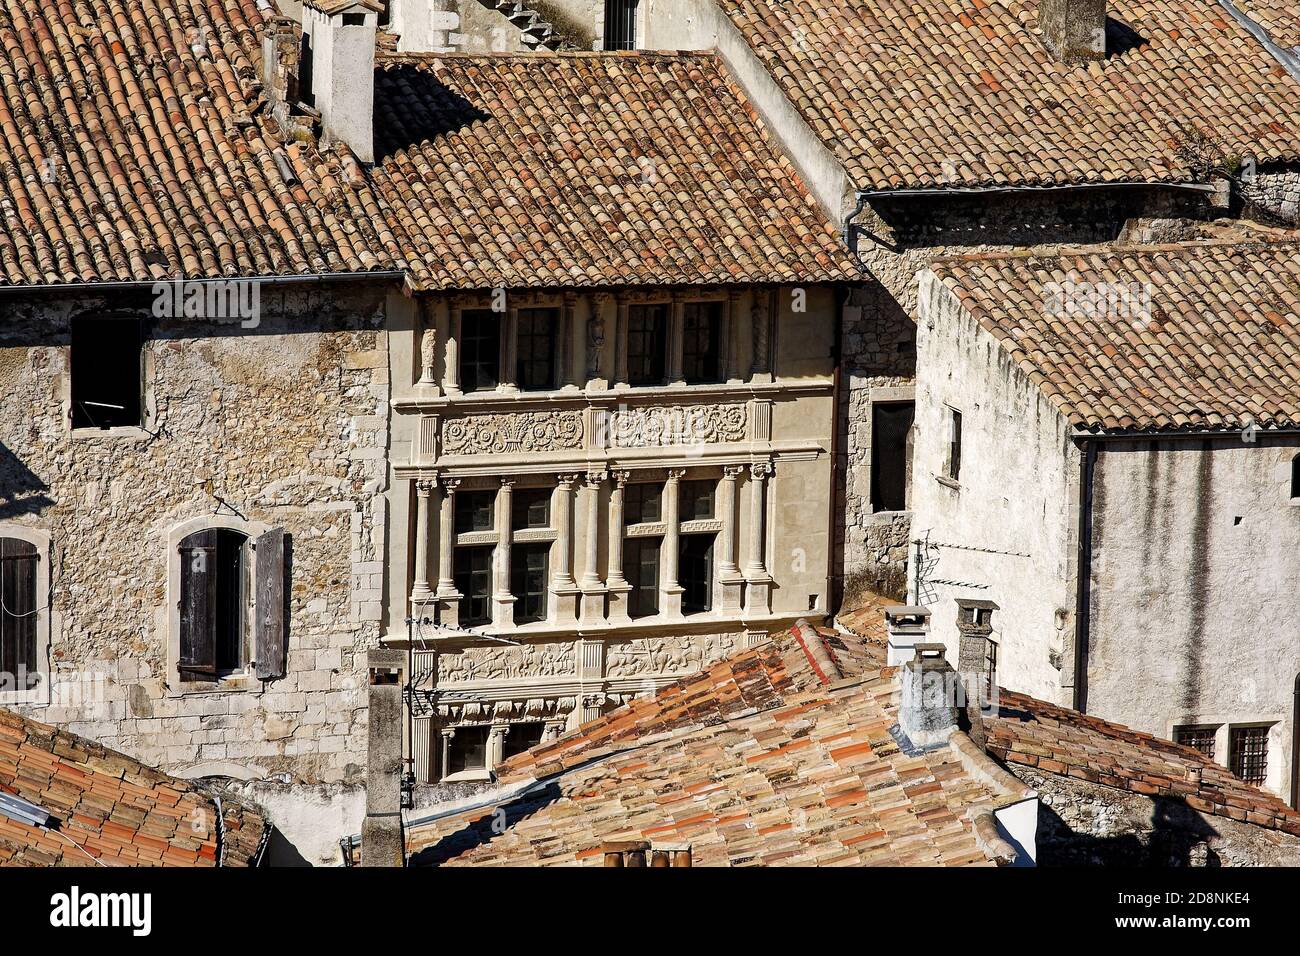 old buildings overview, stone, tile roofs, ornate carving on facade, tightly packed together houses, Viviers France; summer, horizontal Stock Photo